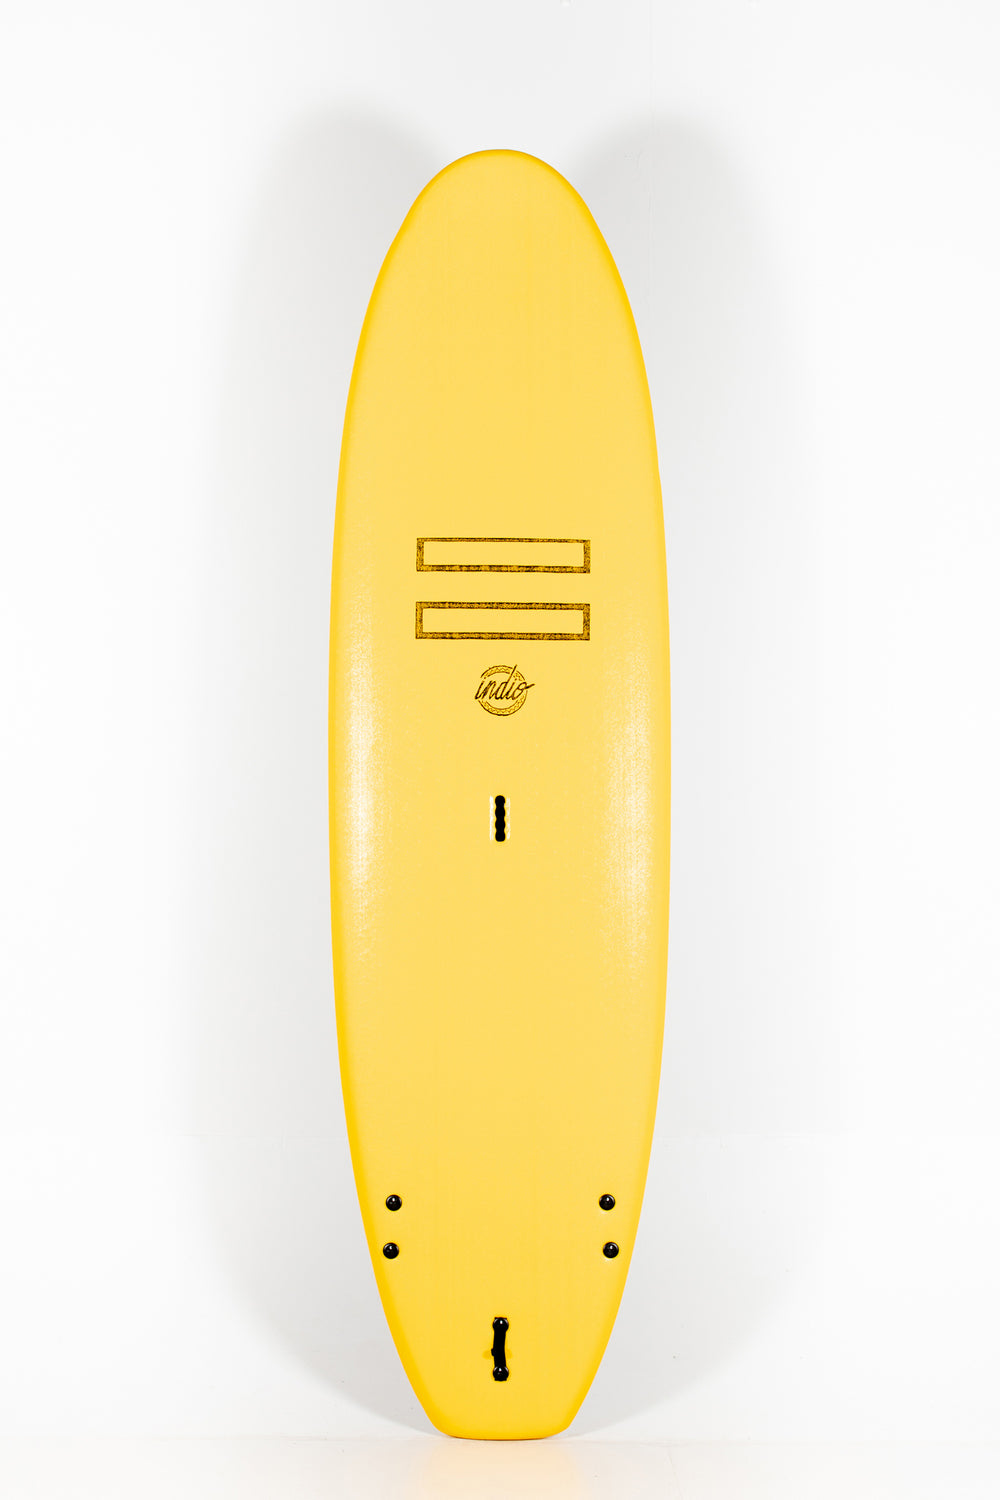 Pukas Surf Shop - INDIO - EASY GOING -  9'0